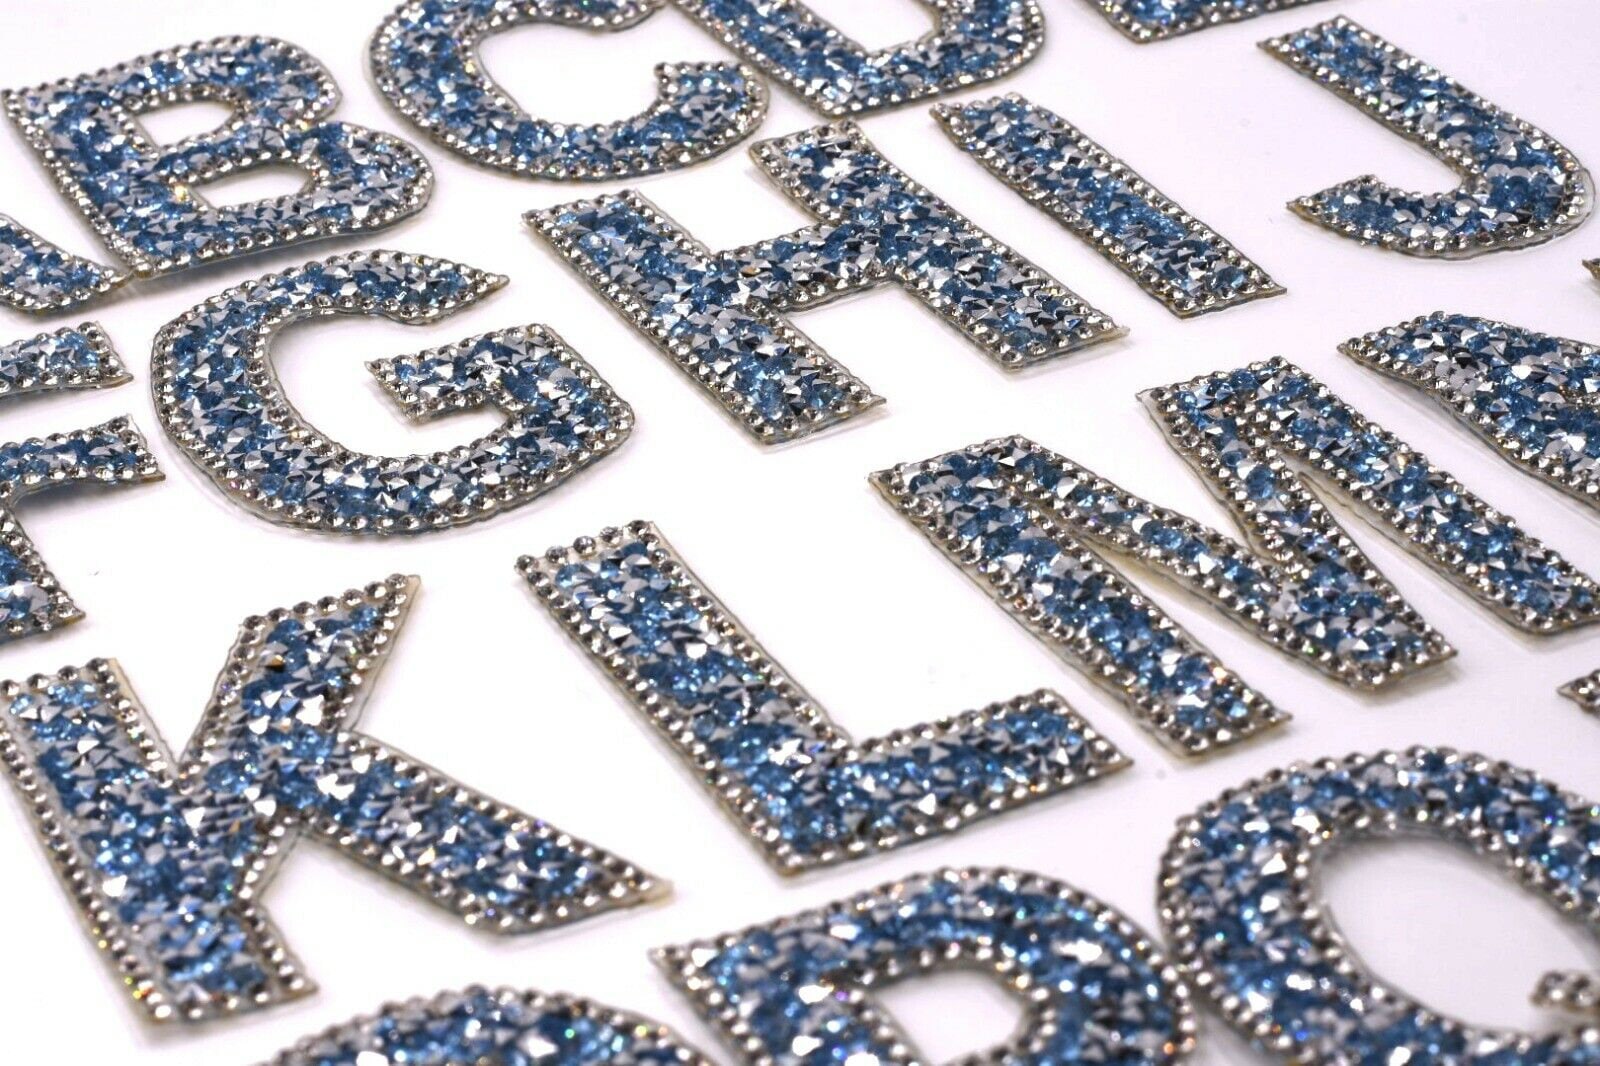 V LETTER Rhinestone Iron on Heat Transfer, Iron on Patches Letters, Iron on  Letters for Fabric, Letter Patches Iron On 